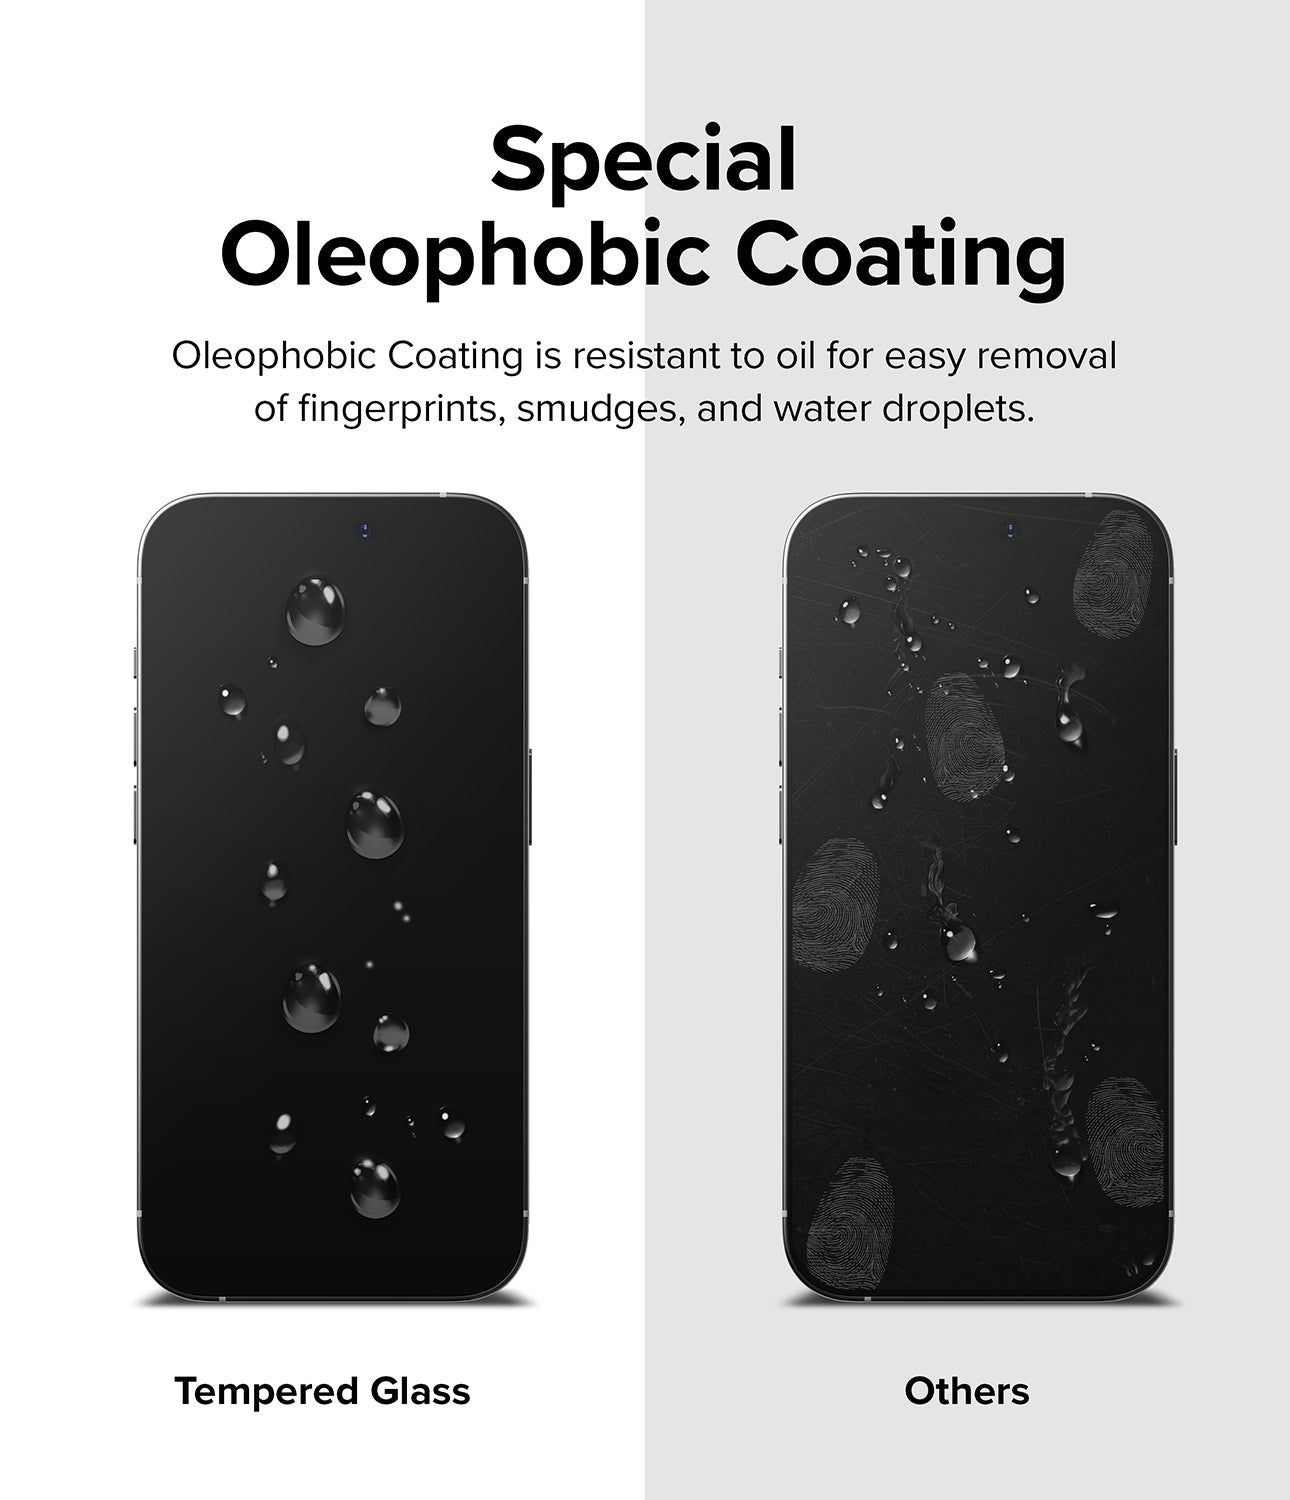 iPhone 14 Pro Max Screen Protector | Full Cover Glass - Special Oleophobic Coating. Oleophobic coating is resistant to oil for easy removal of fingerprints, smudges, and water droplets.